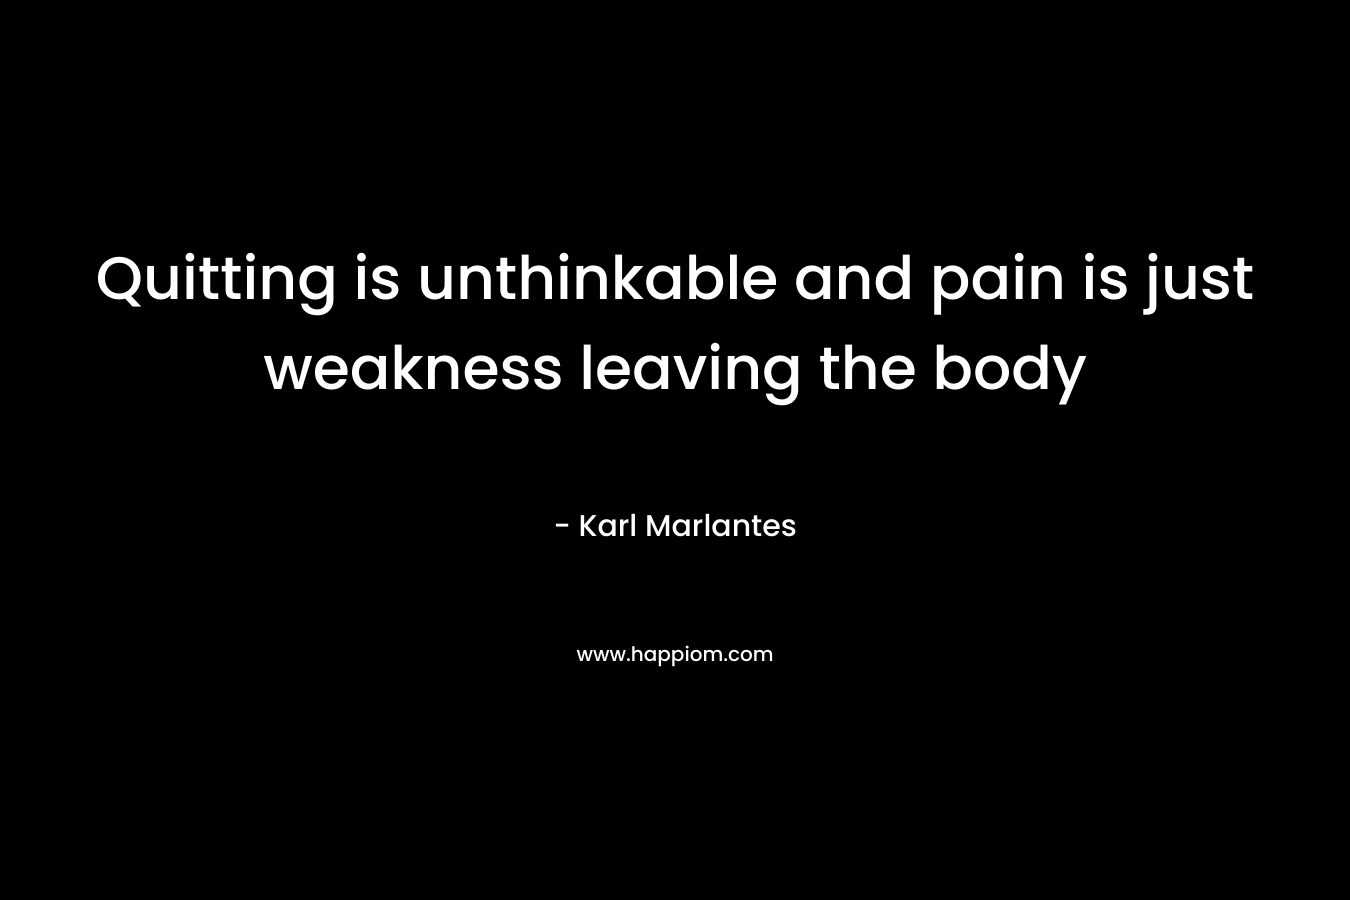 Quitting is unthinkable and pain is just weakness leaving the body – Karl Marlantes